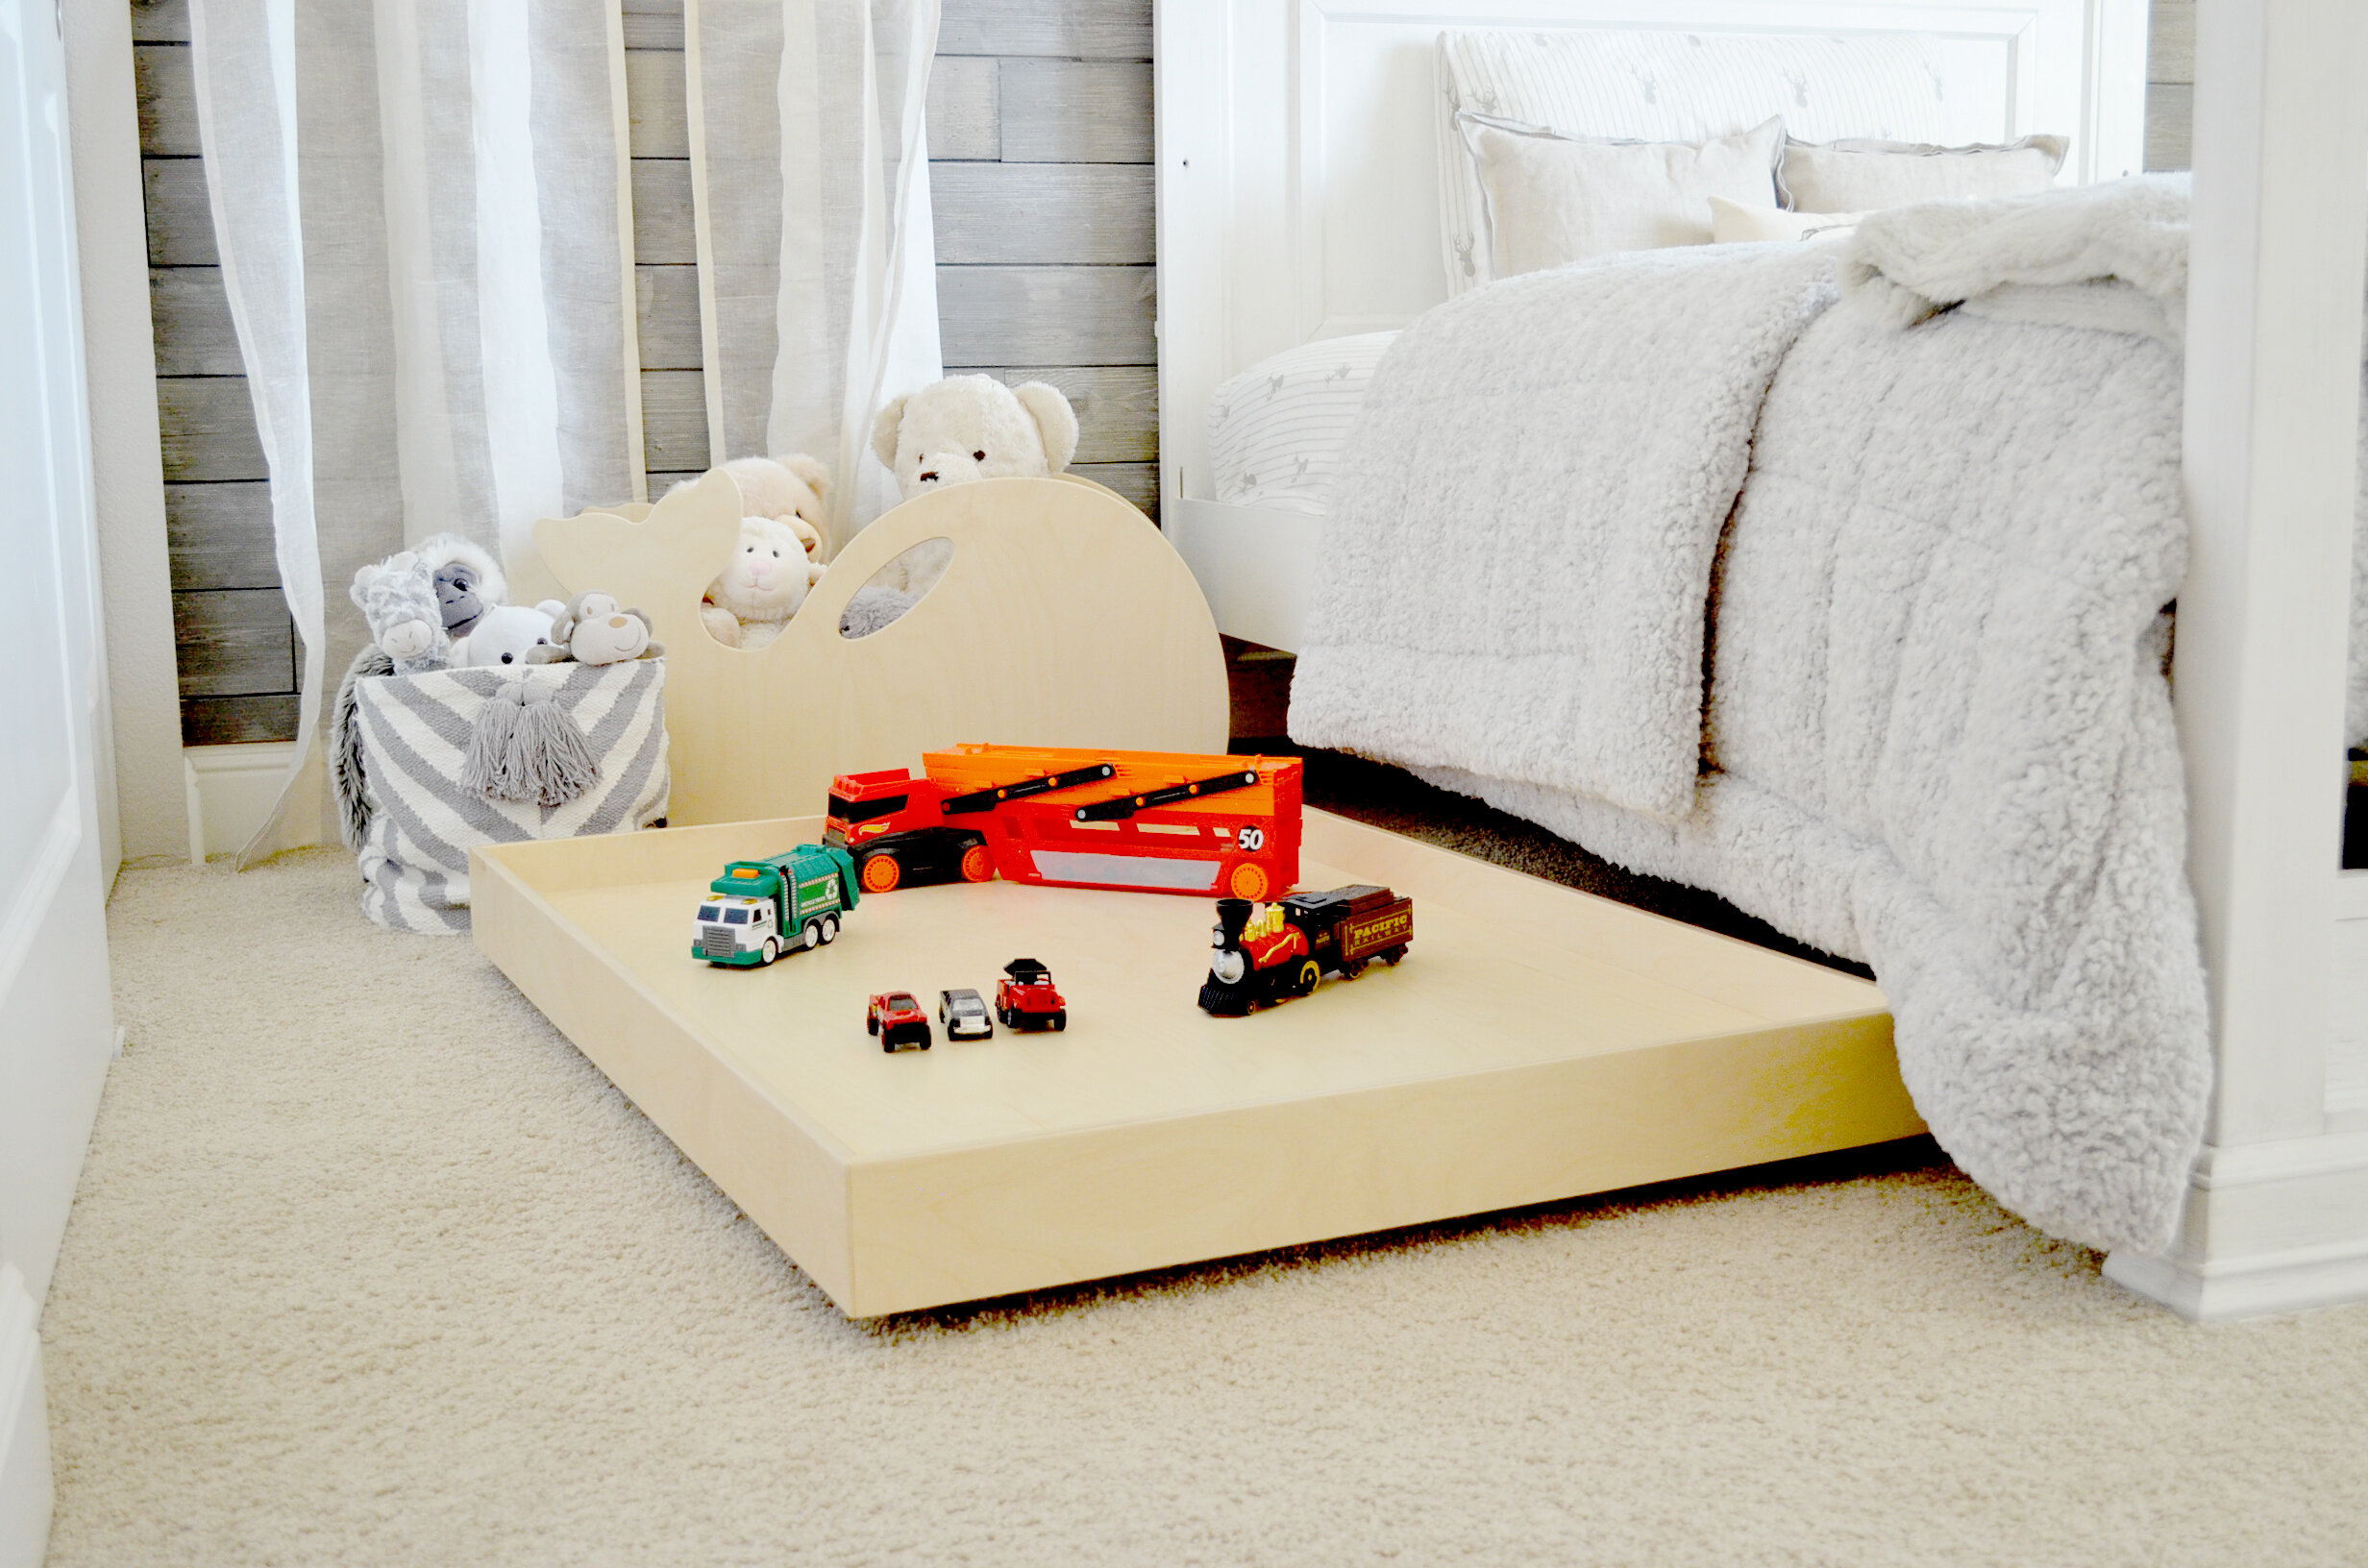 kids play bed